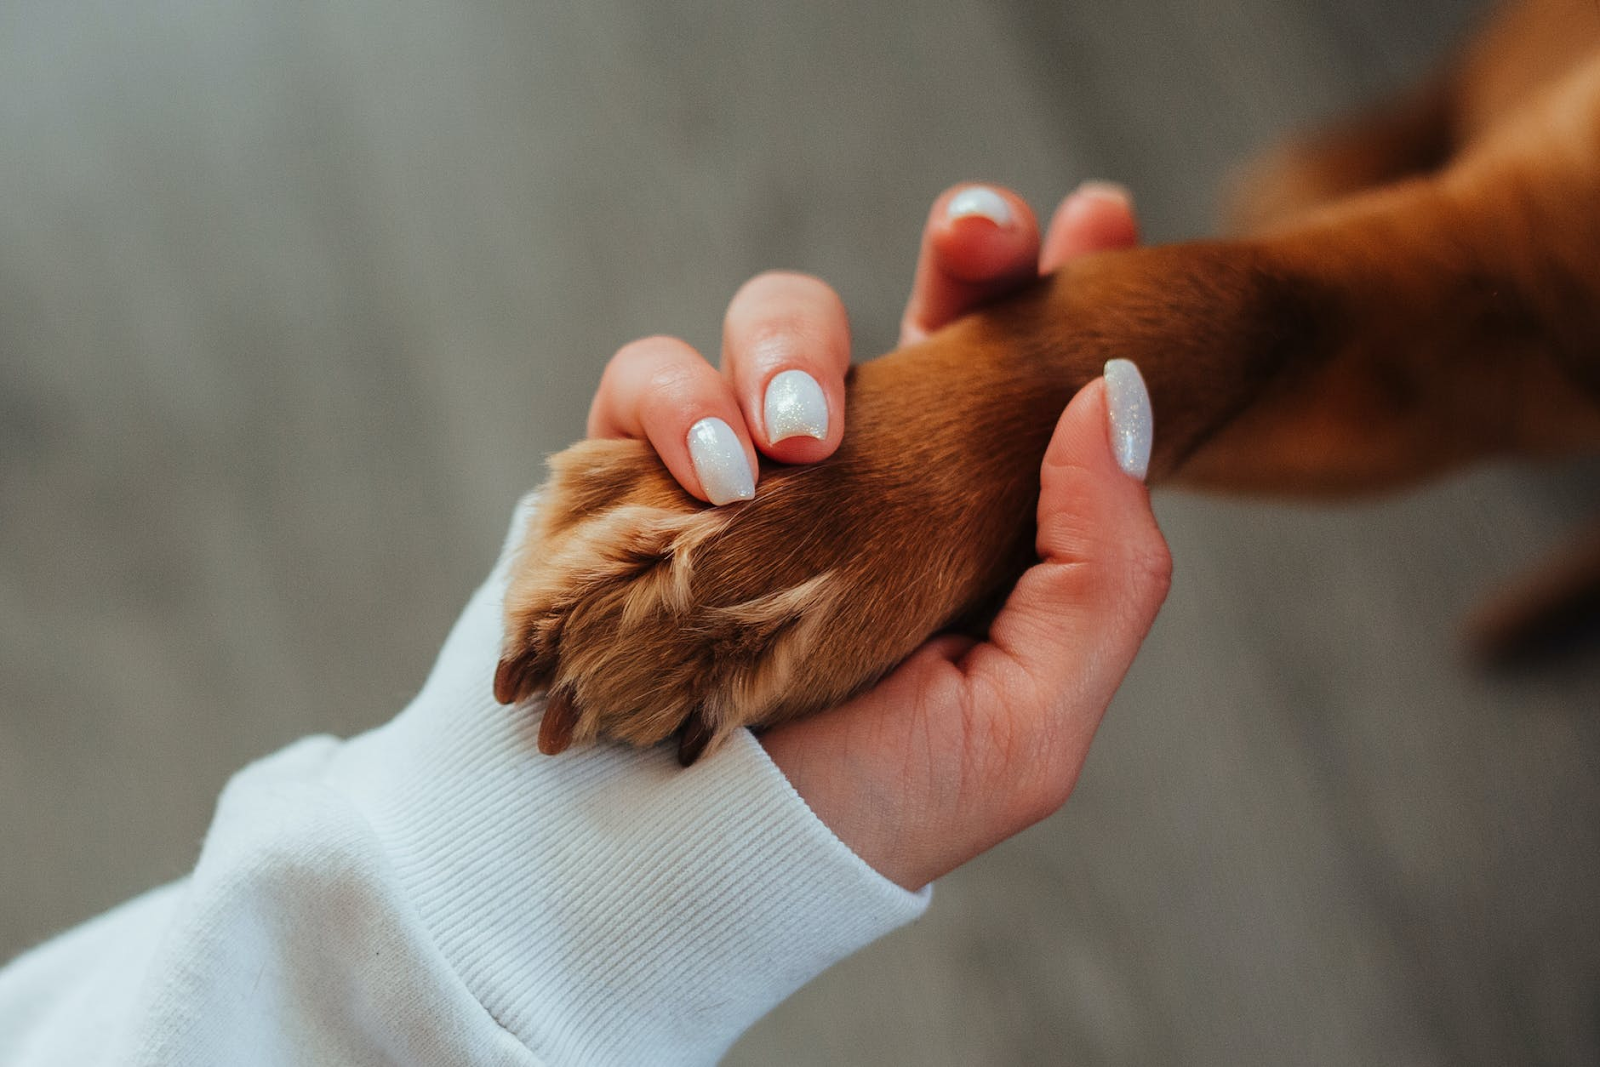 How to Teach a Dog Paw? Everything You Need to Know